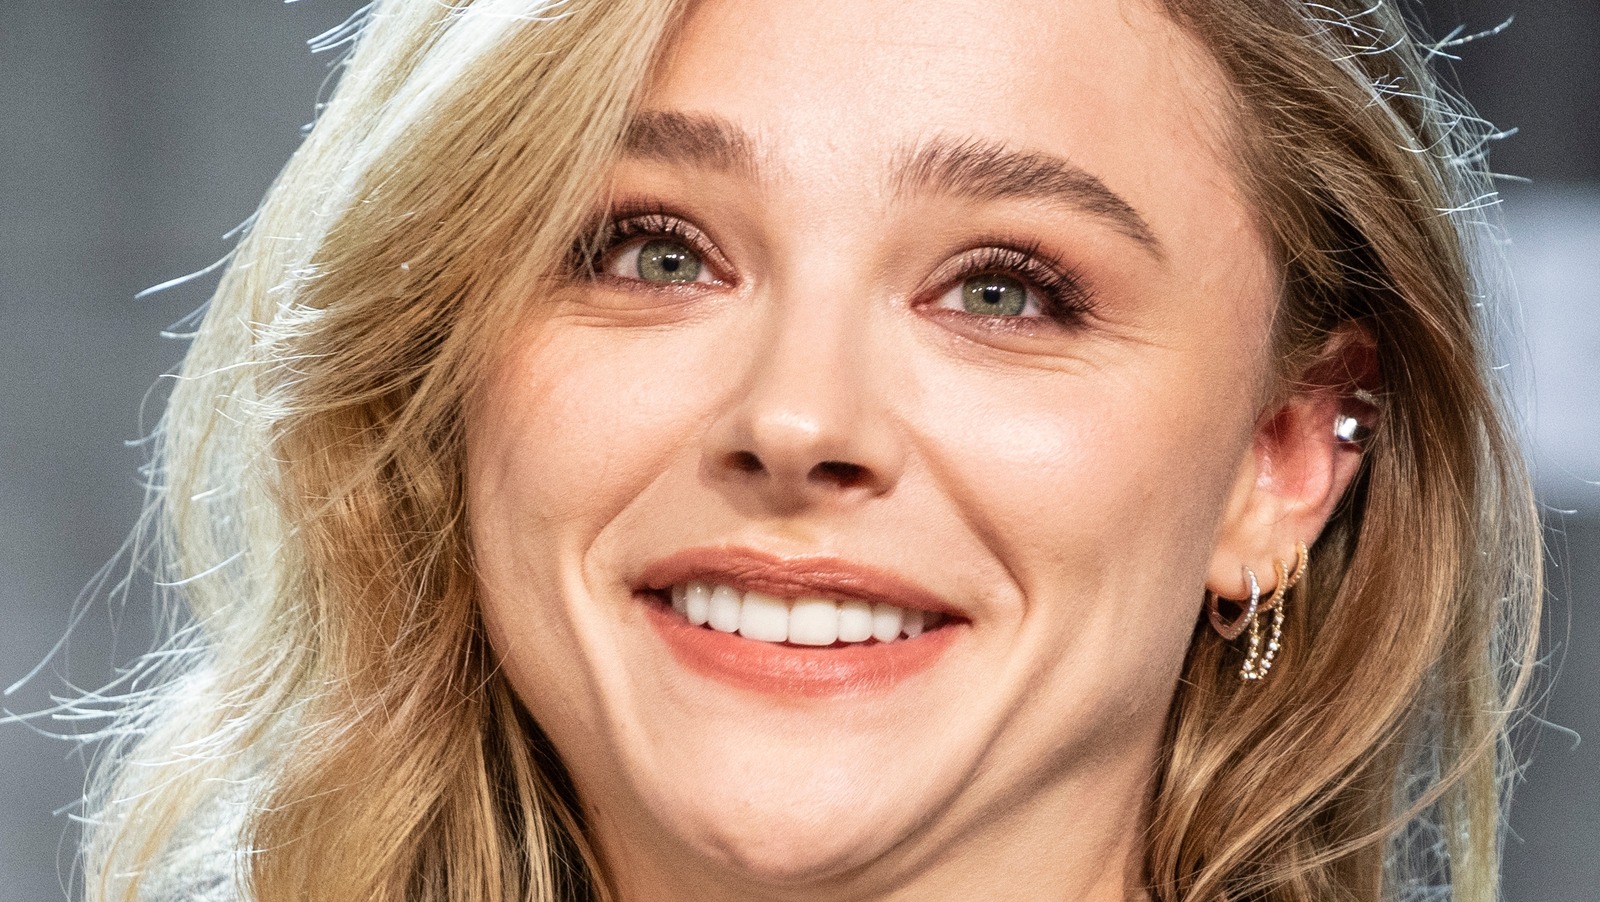 What You Never Noticed About Chloe Grace Moretz's Horror Movies